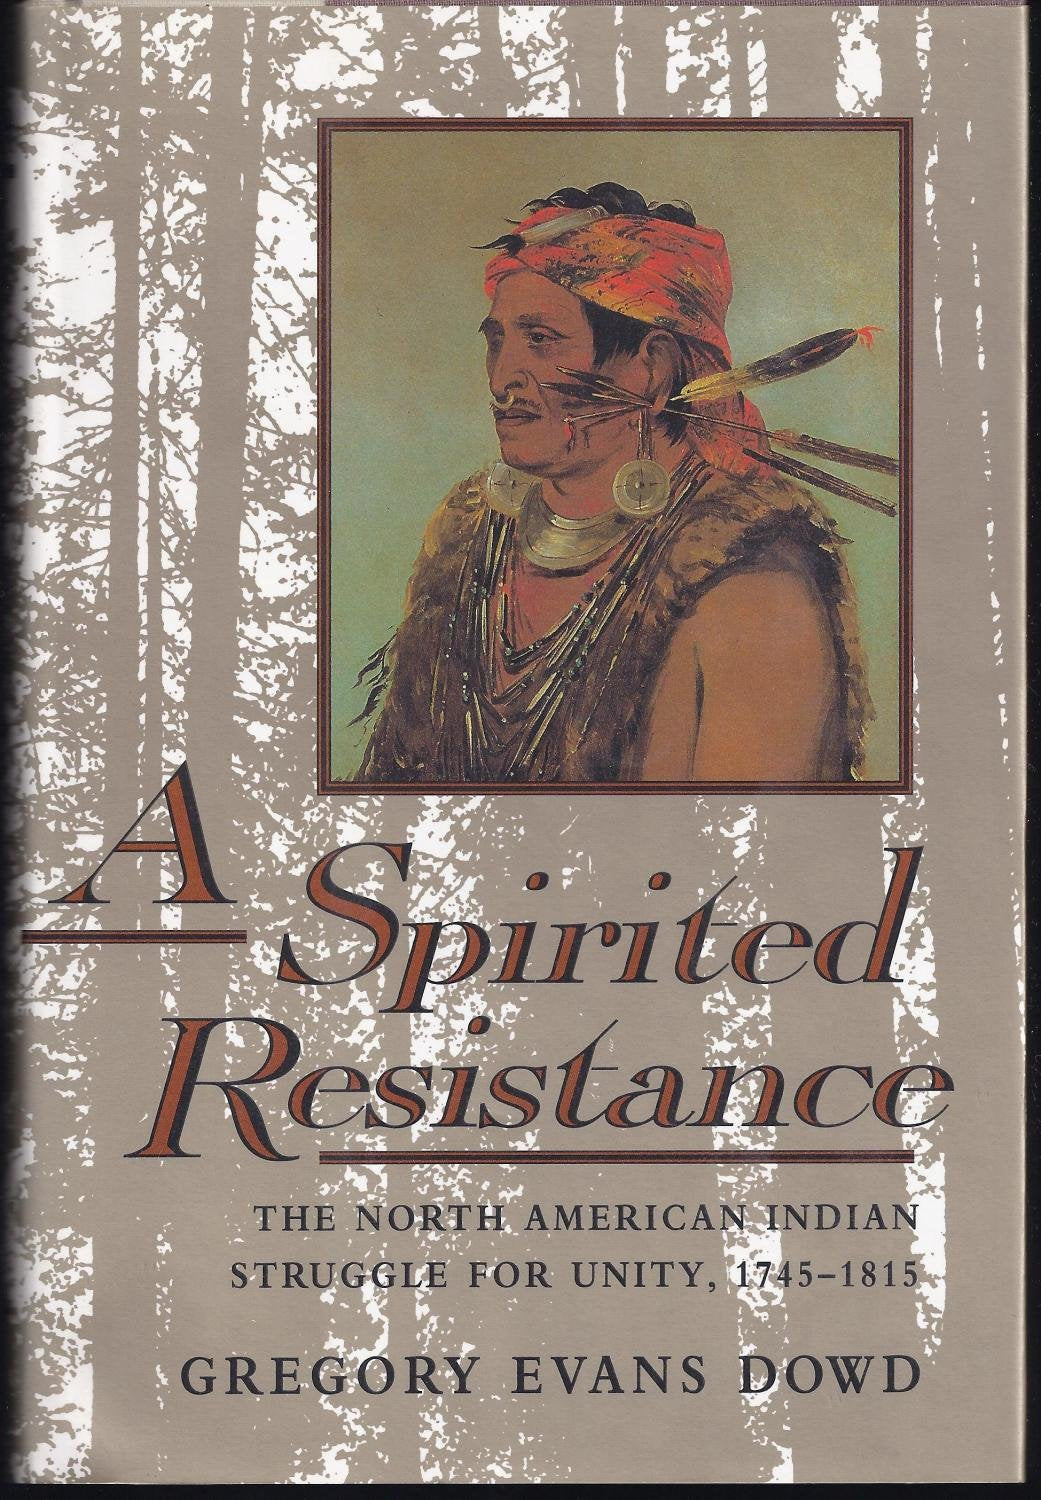 A Spirited Resistance: The North American Indian Struggle for Unity, 1745–1815